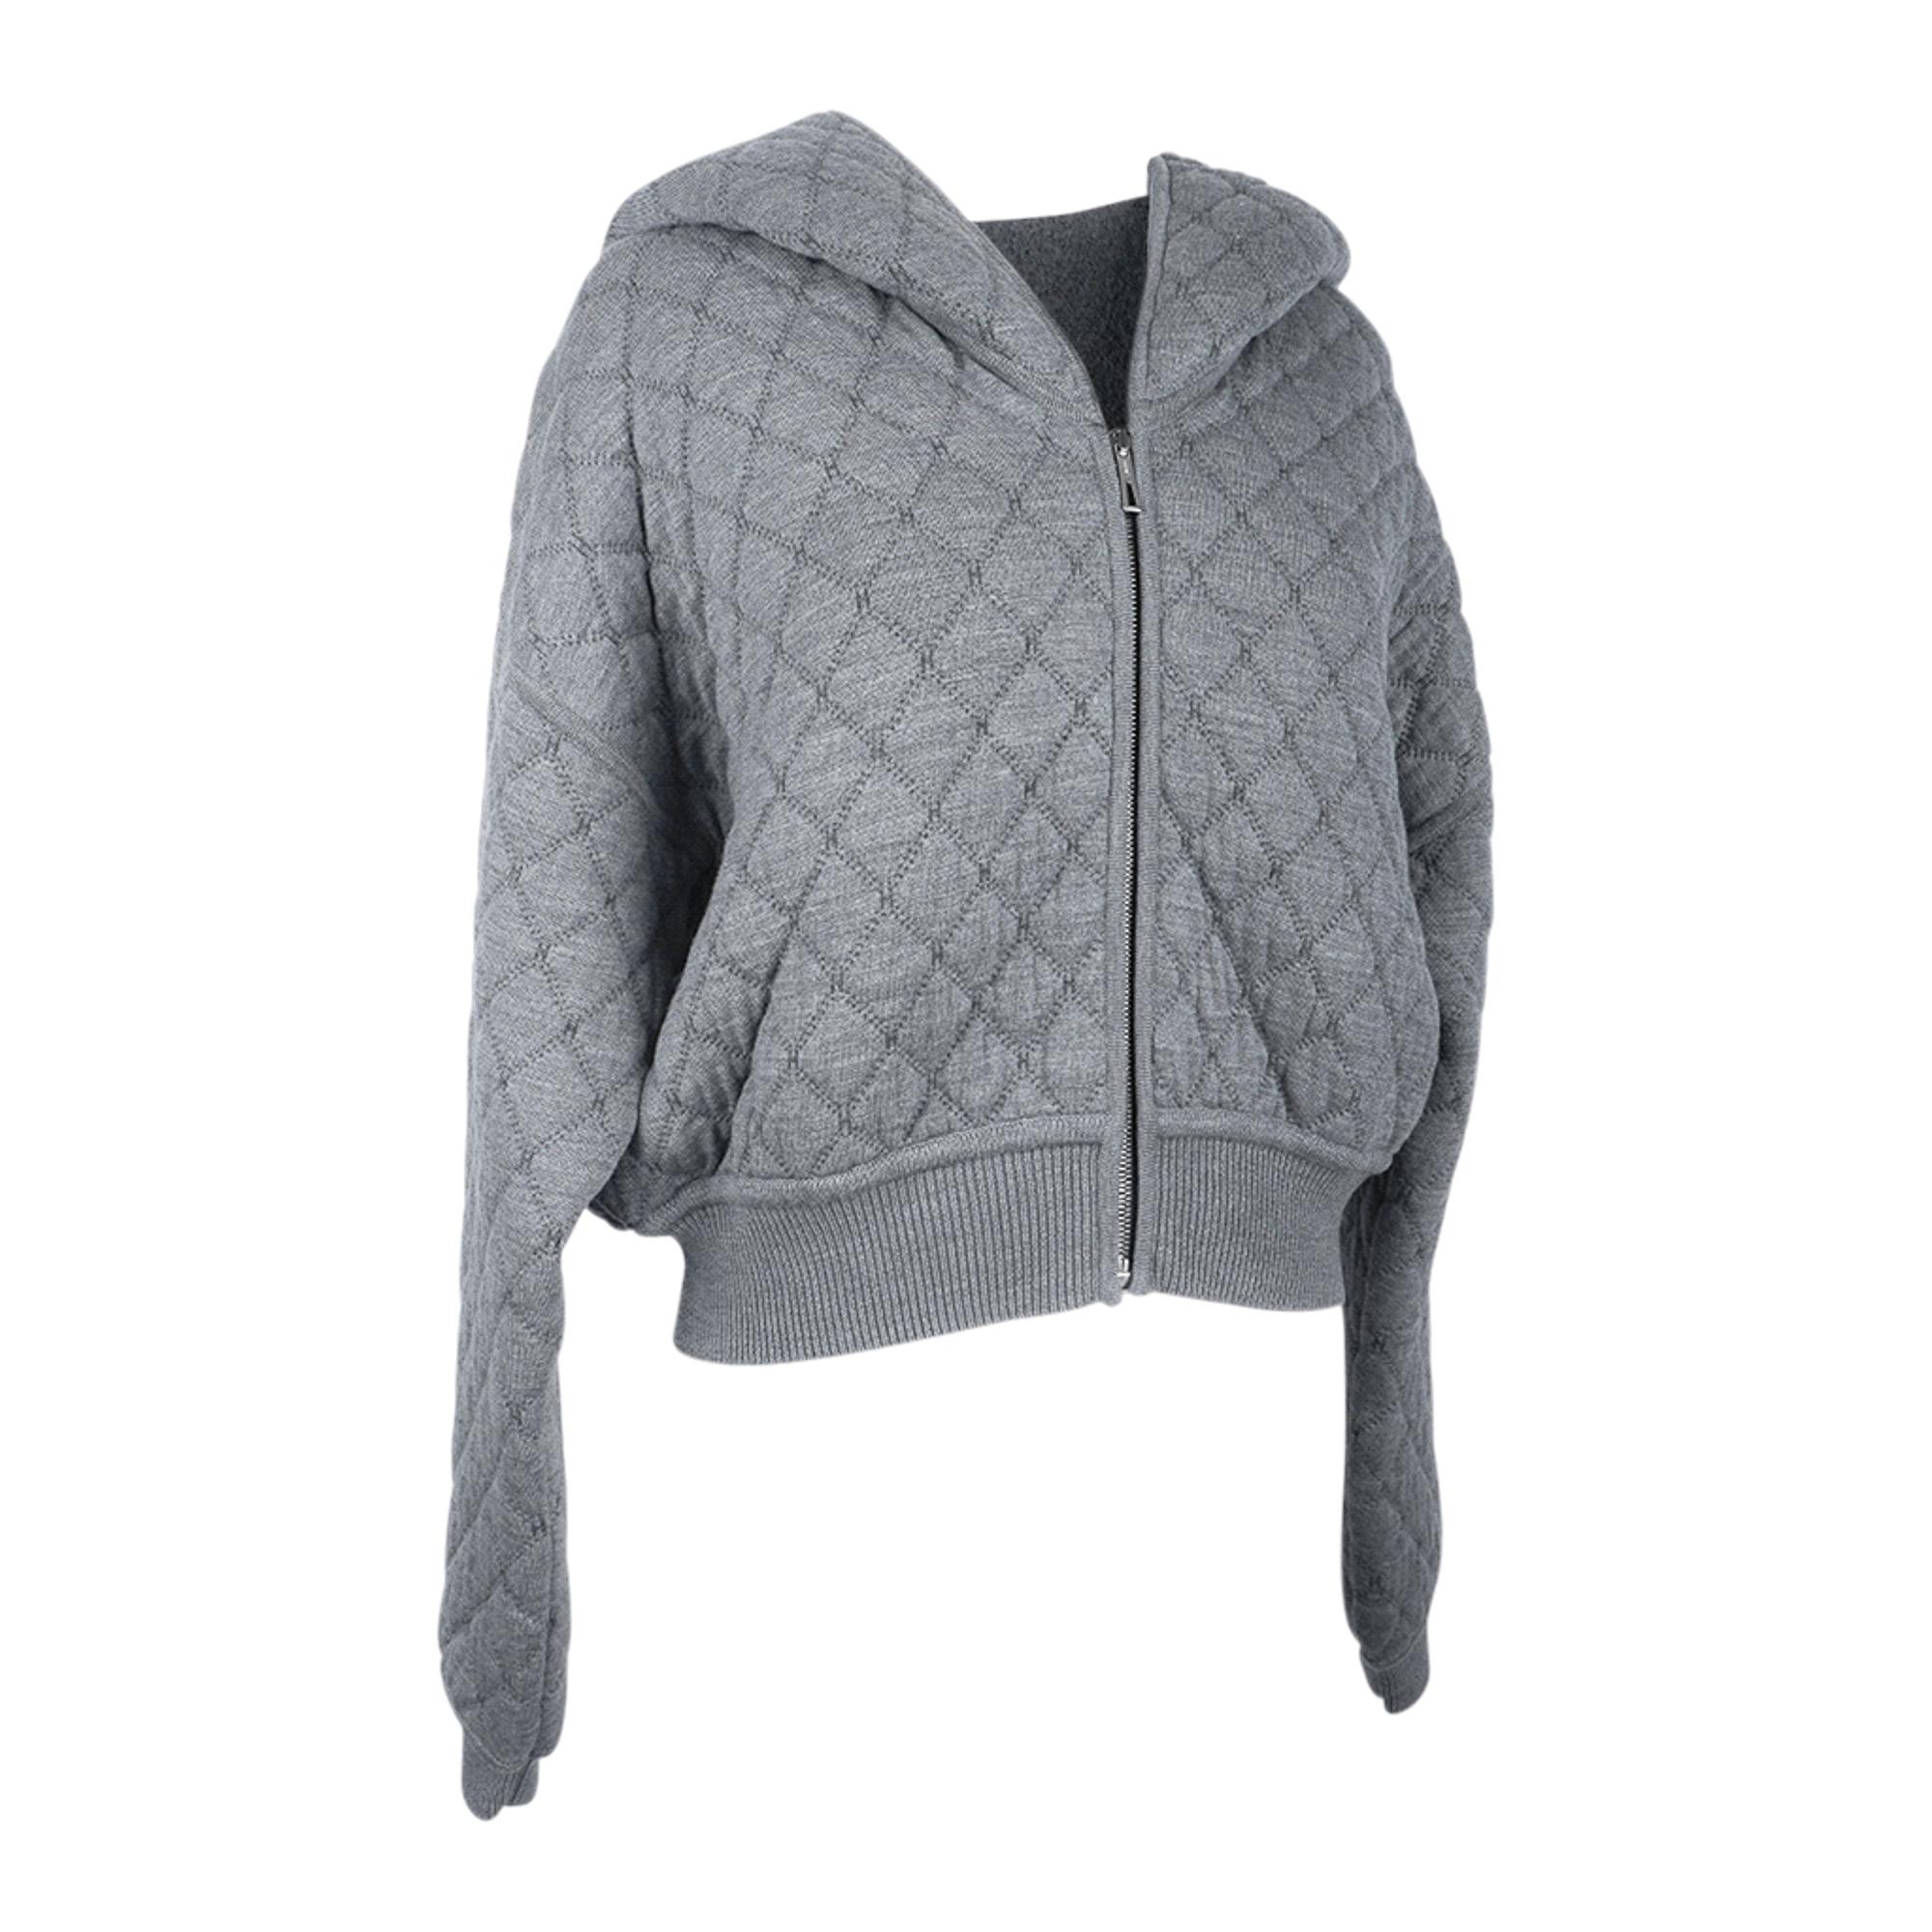 Mightychic offers an Guaranteed authentic Hermes Zip Cardigan quilted hoodie featured in grey.
Hoodie is lined in a blend of wool and camel hair.
Quilted stitiching has small H detail throughout.
Front zip with logo pull.
Drop shoulder.
Ribbed cuffs